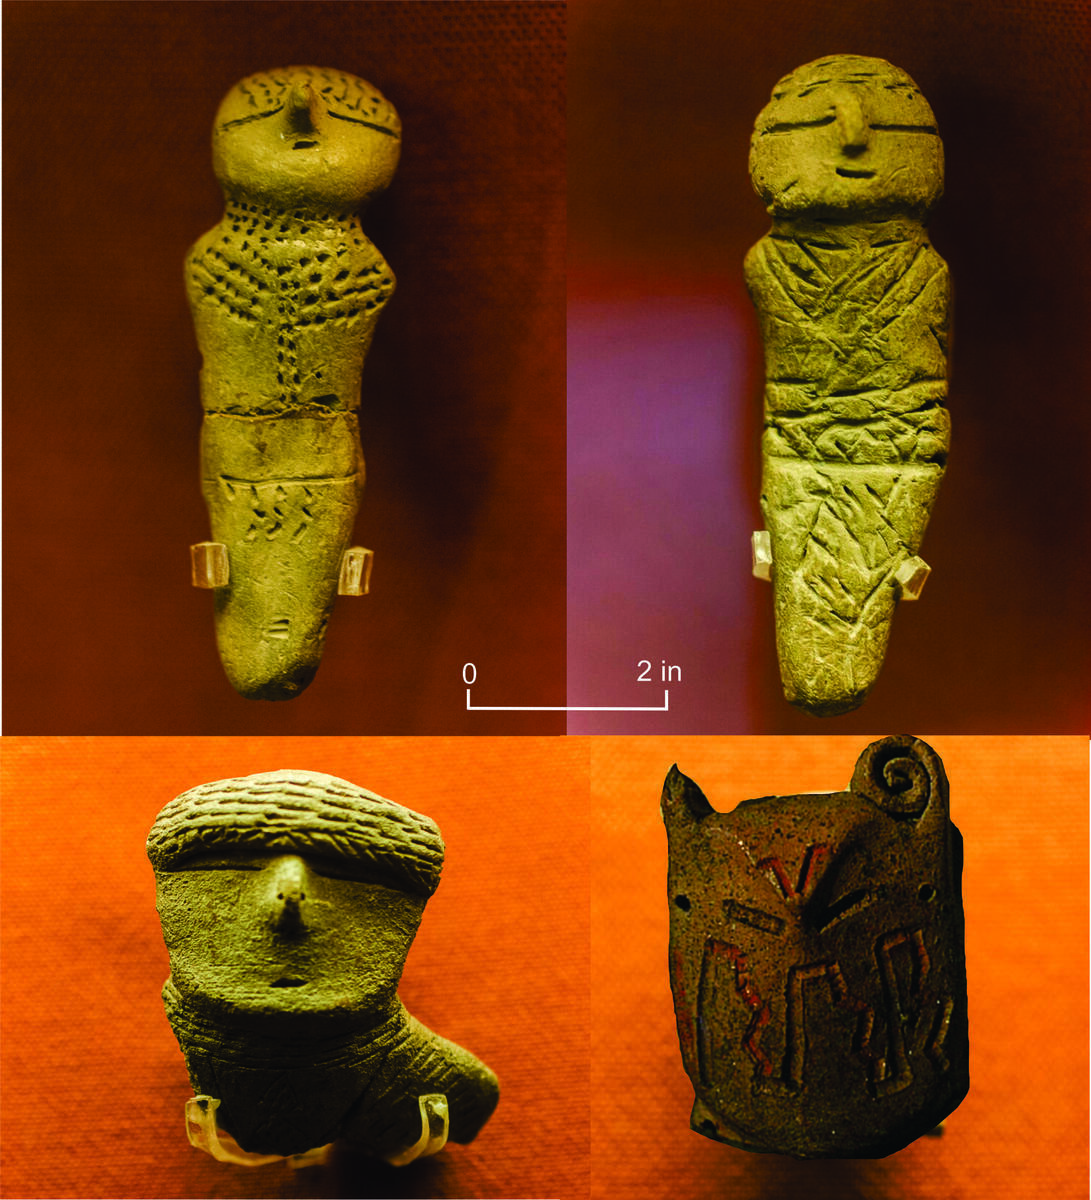 four ceramic figurines, eyes shown as horizontal slits, pointed noses, embossed designs for hair and clothing